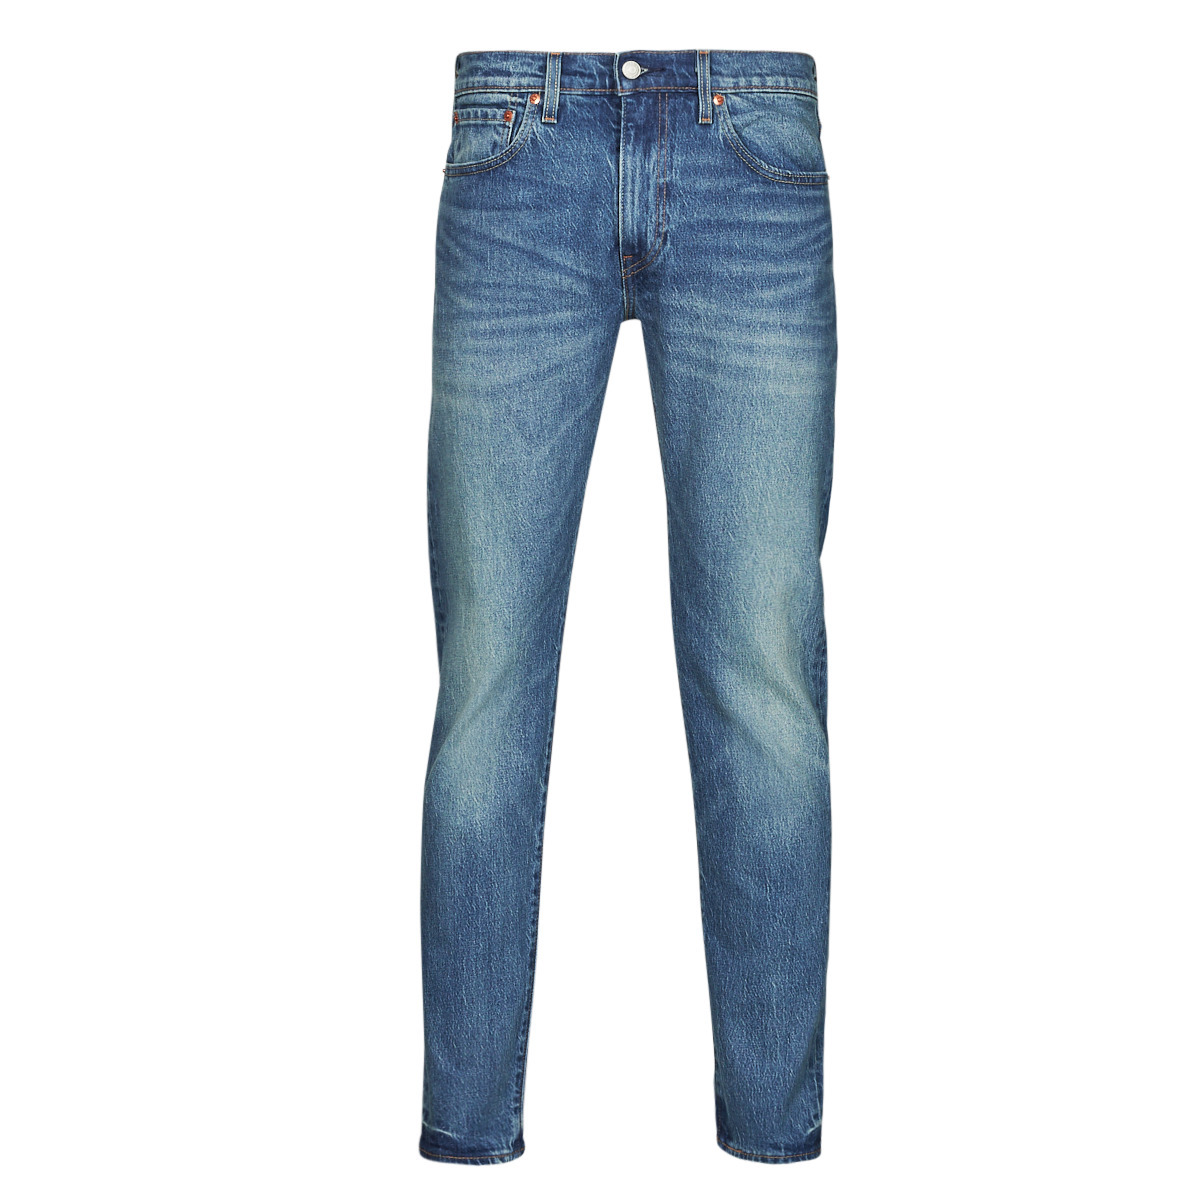 Levi's - Men's Skinny Jeans Blue from Spartoo GOOFASH